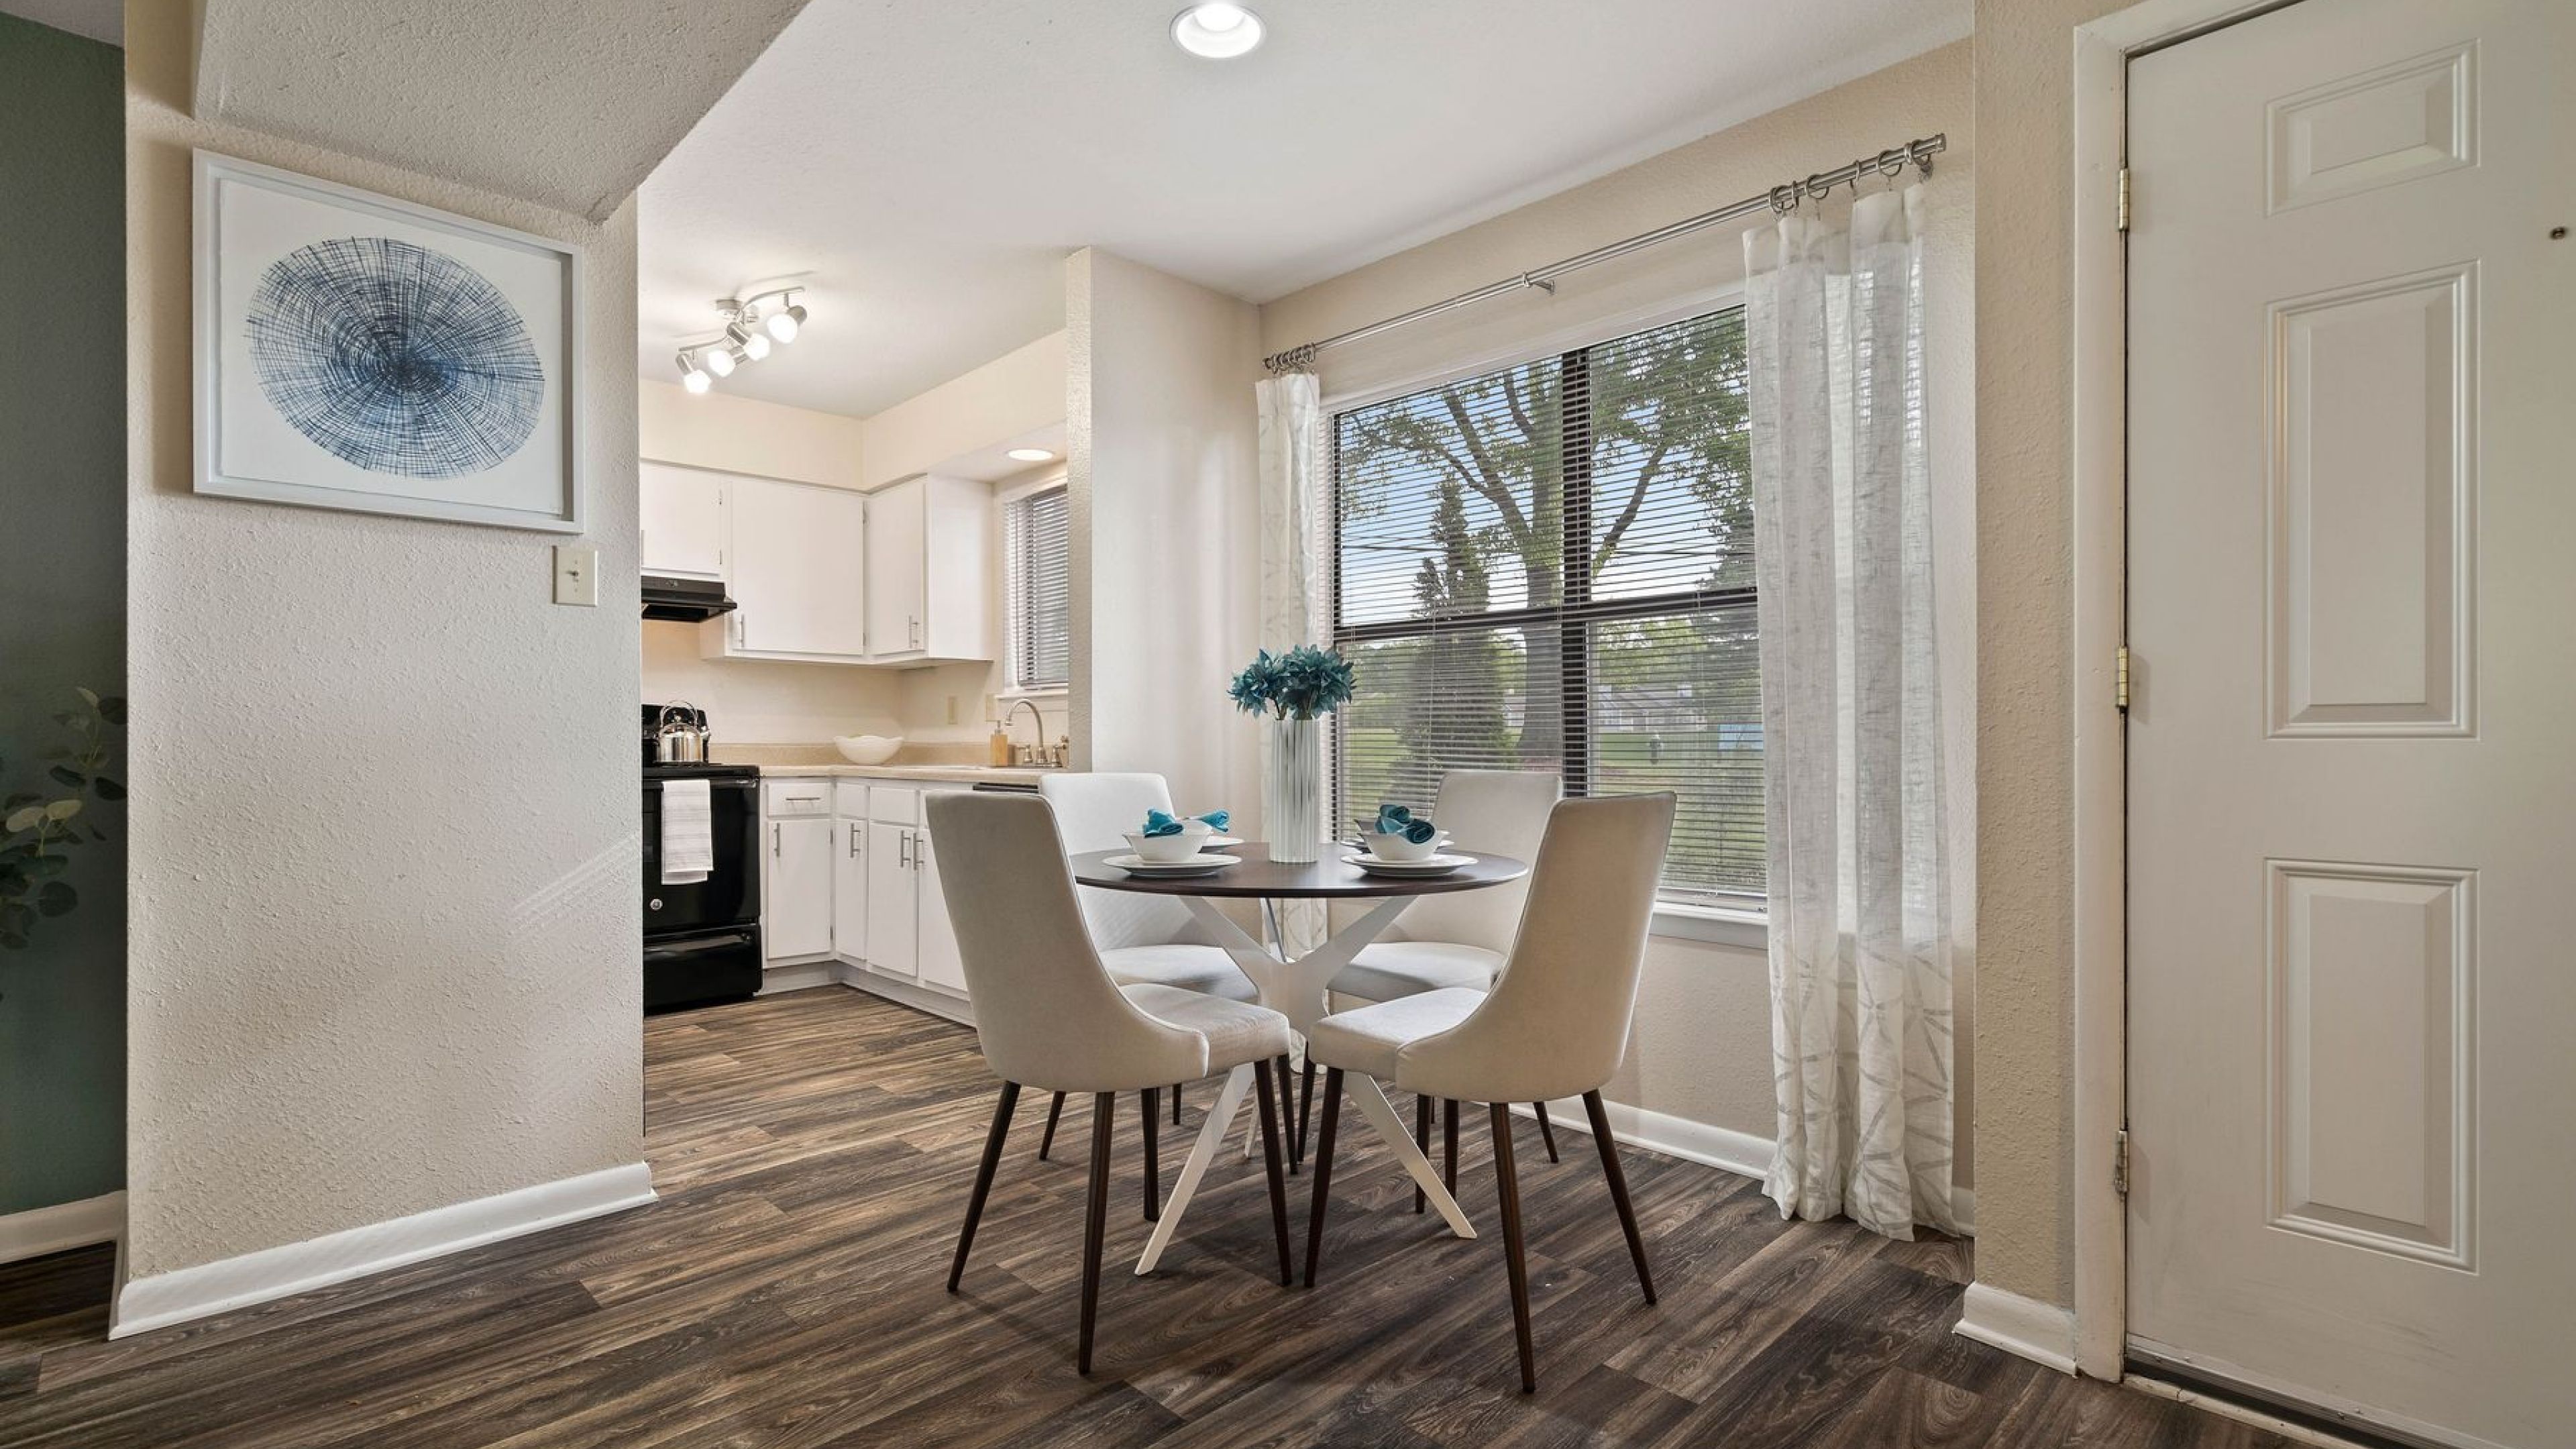 Hawthorne at Oak Ridge apartment living space and kitchen with small dining table and appliances